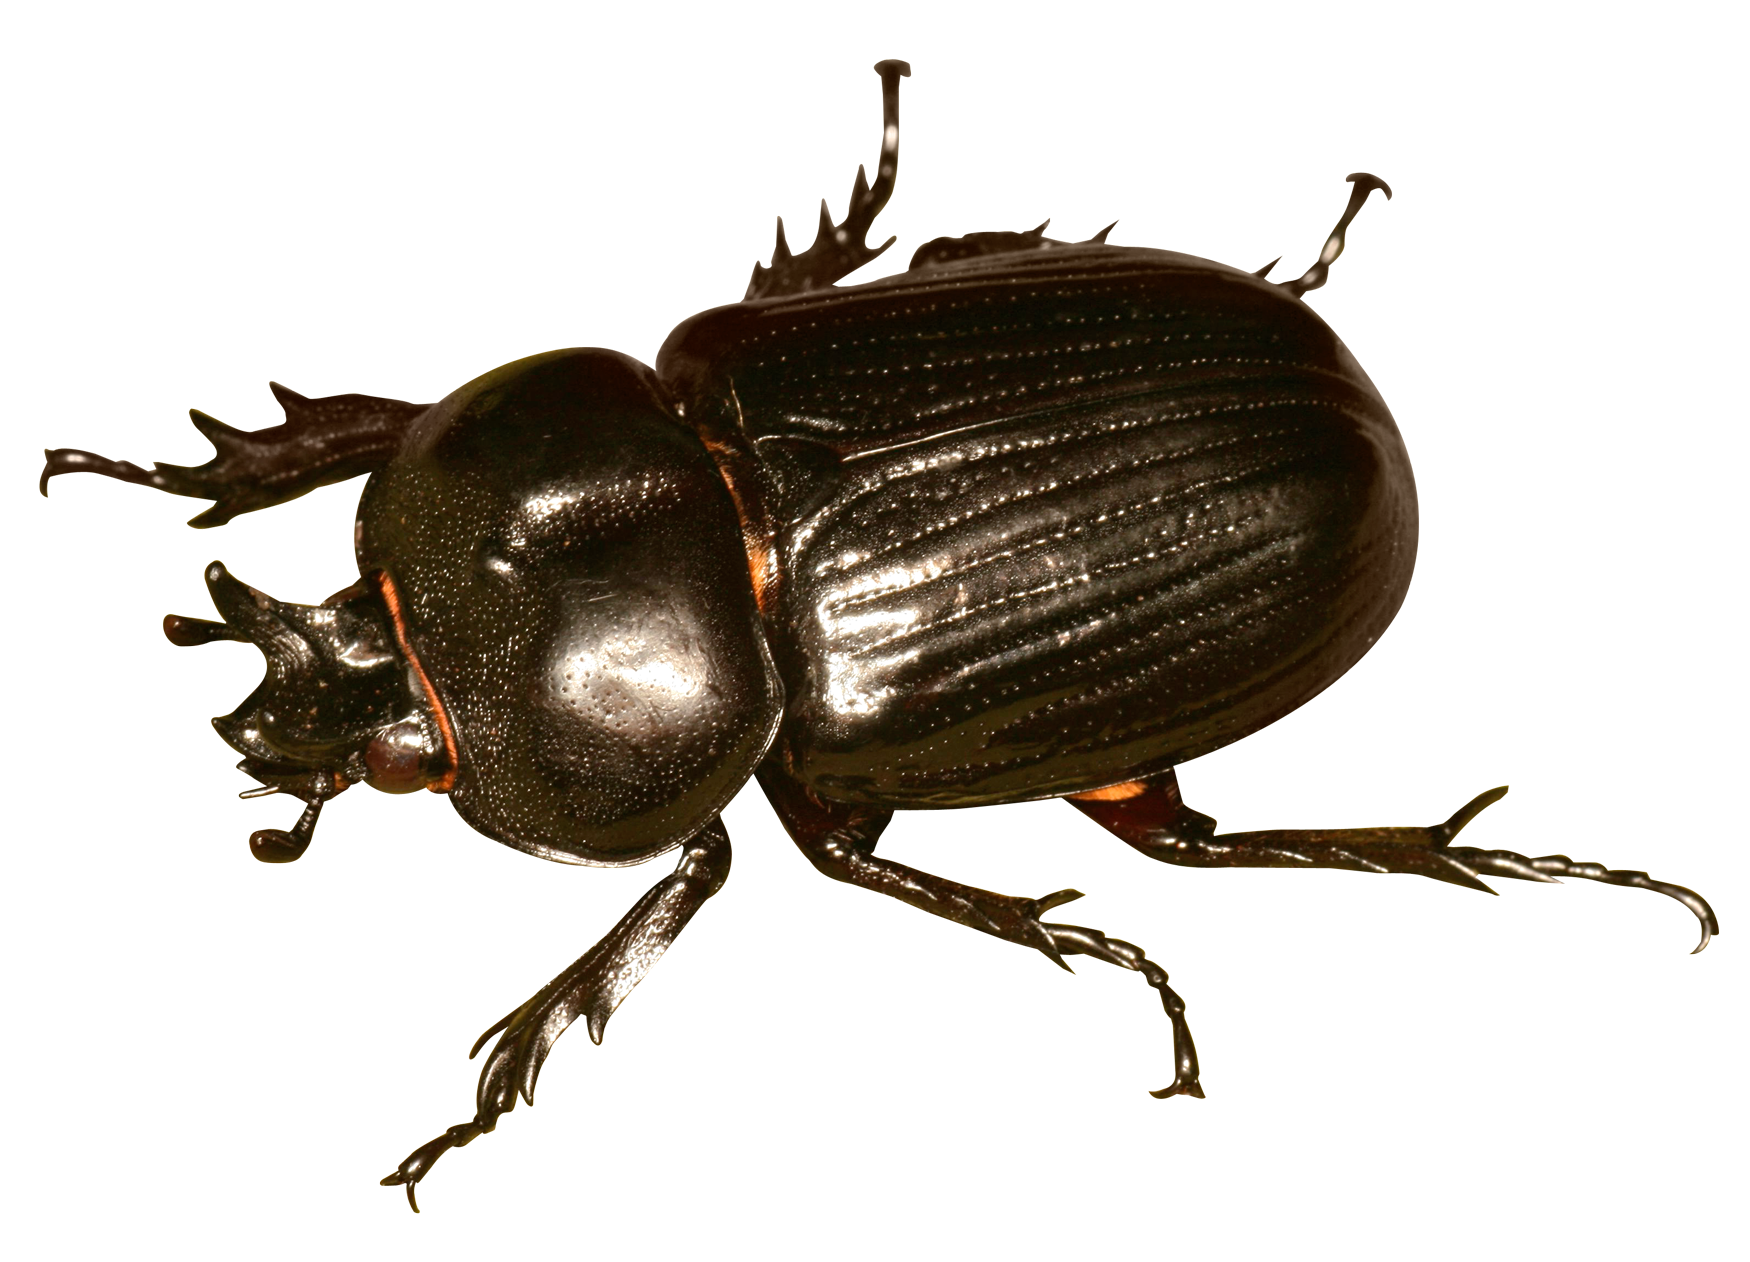 Insect PNG Transparent Image